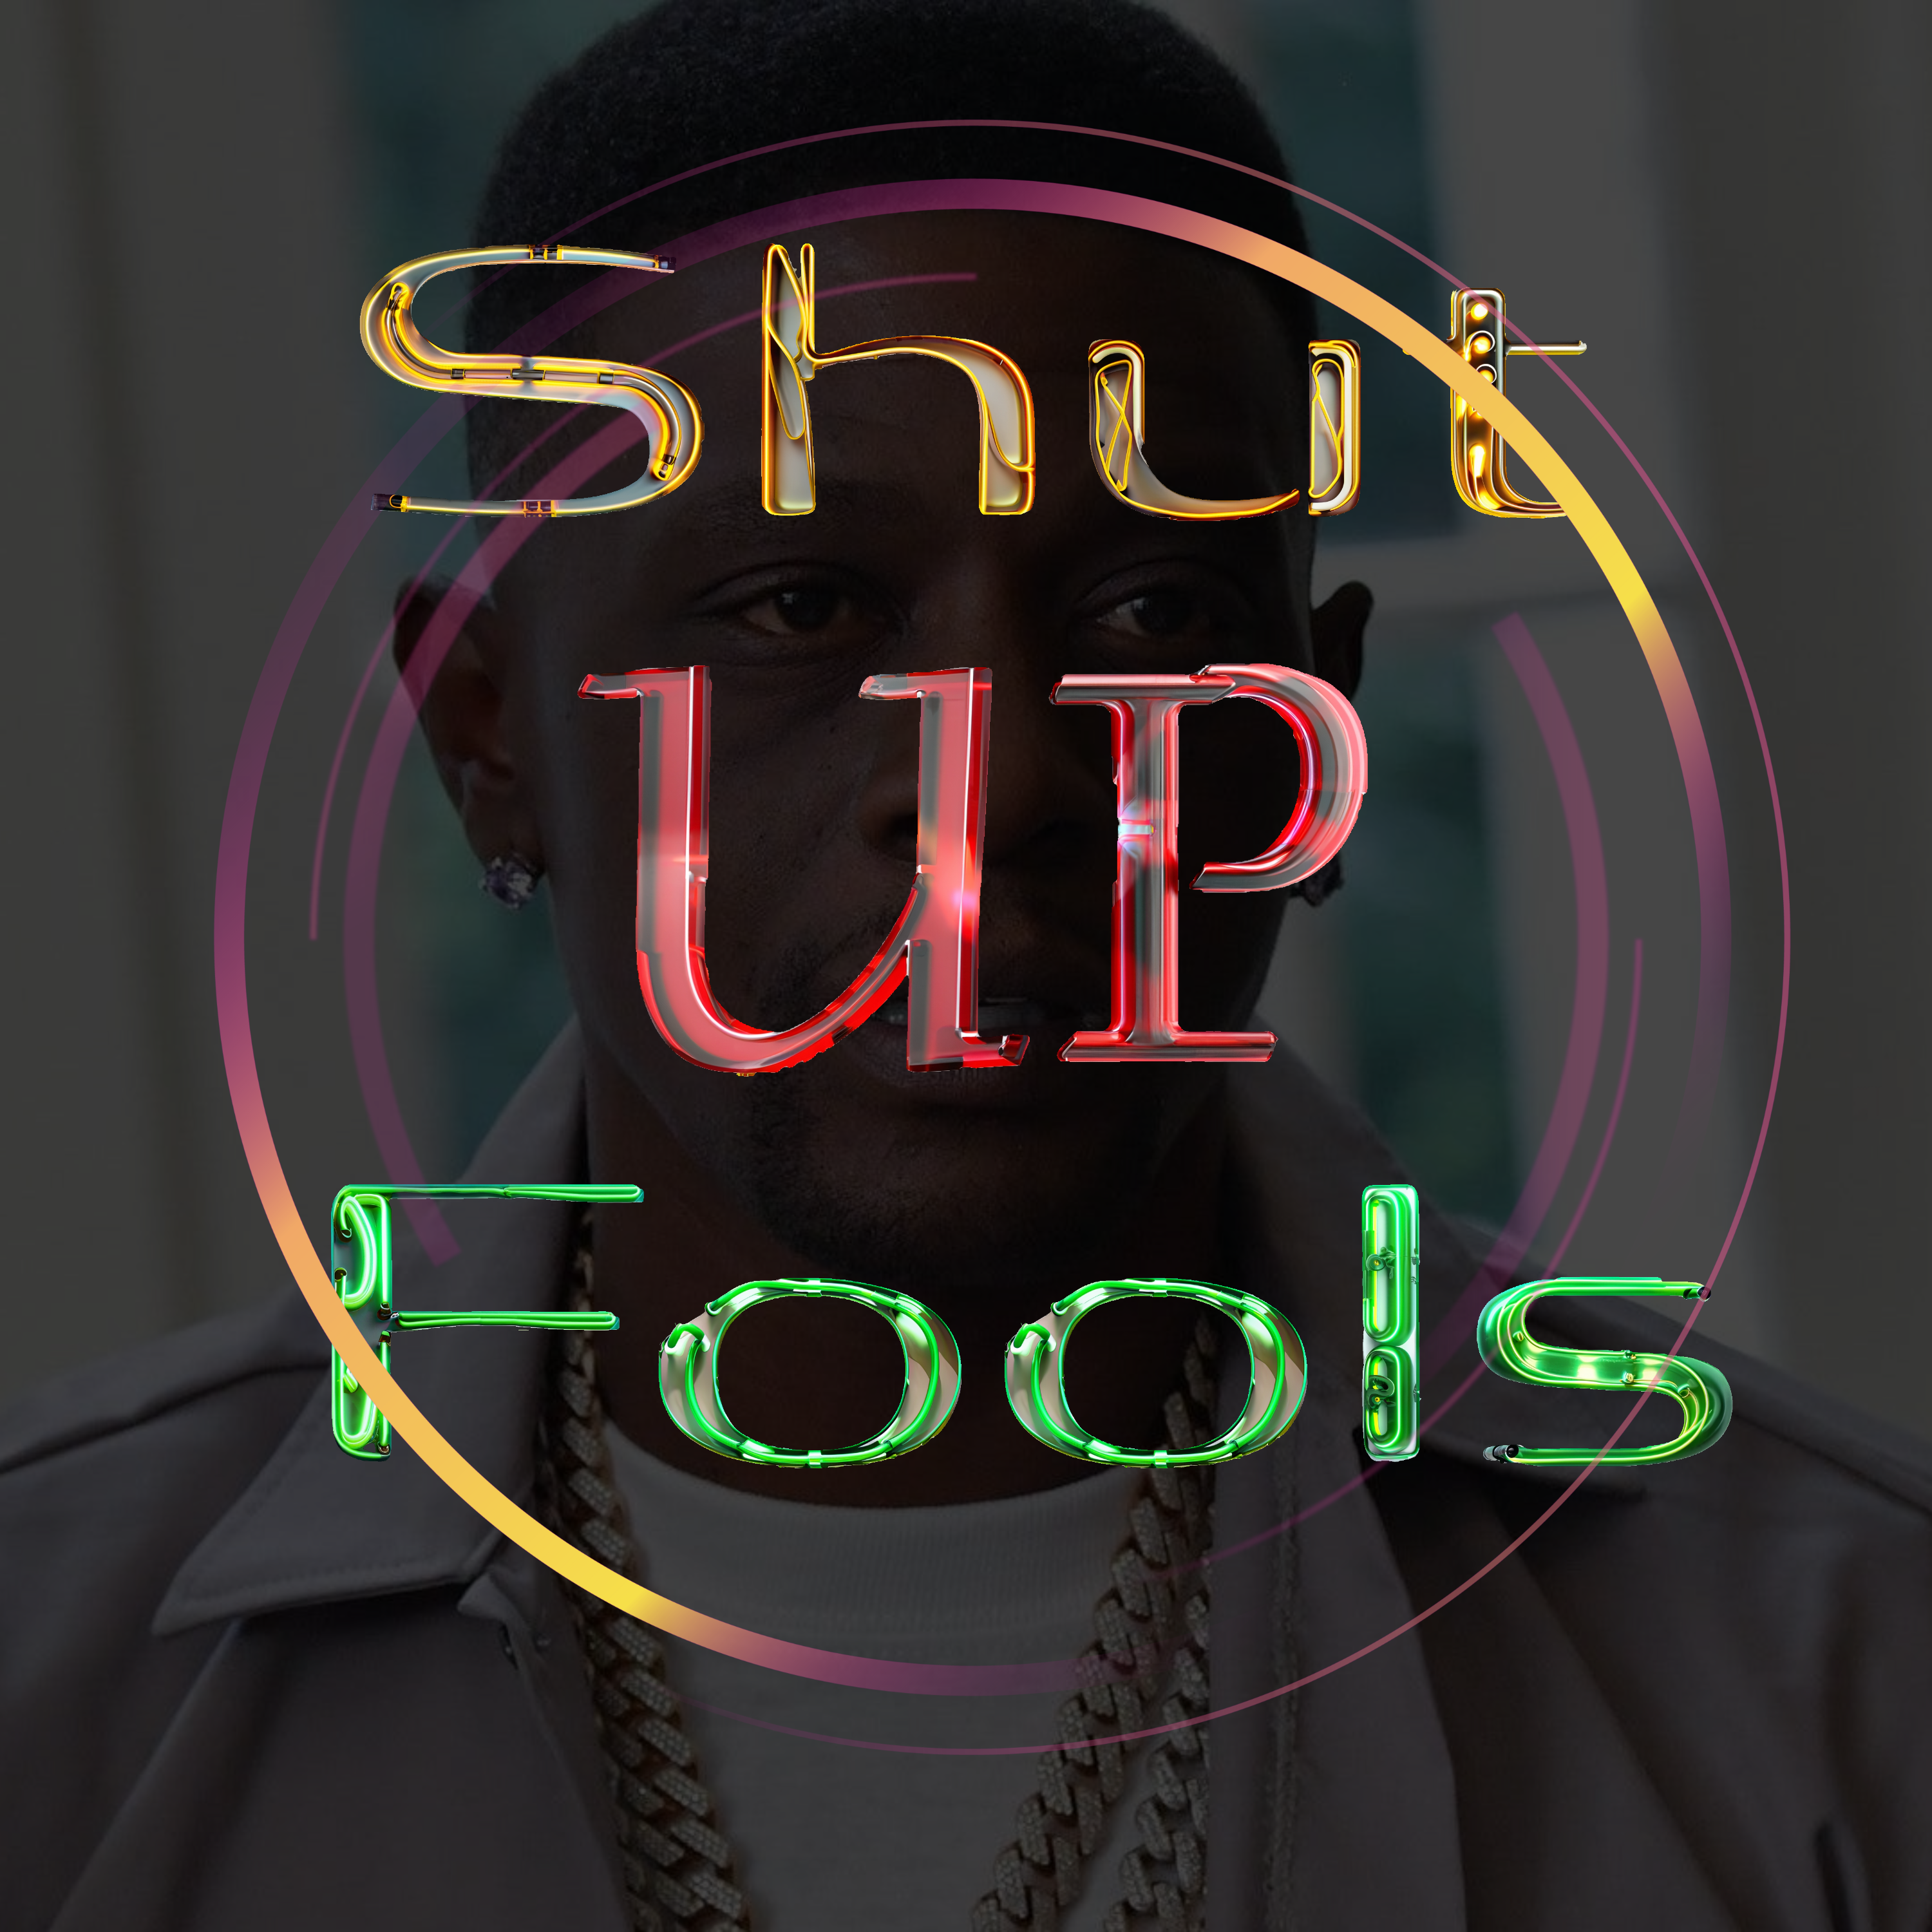 Shut Up Fool 1.6.24: The Color Fool